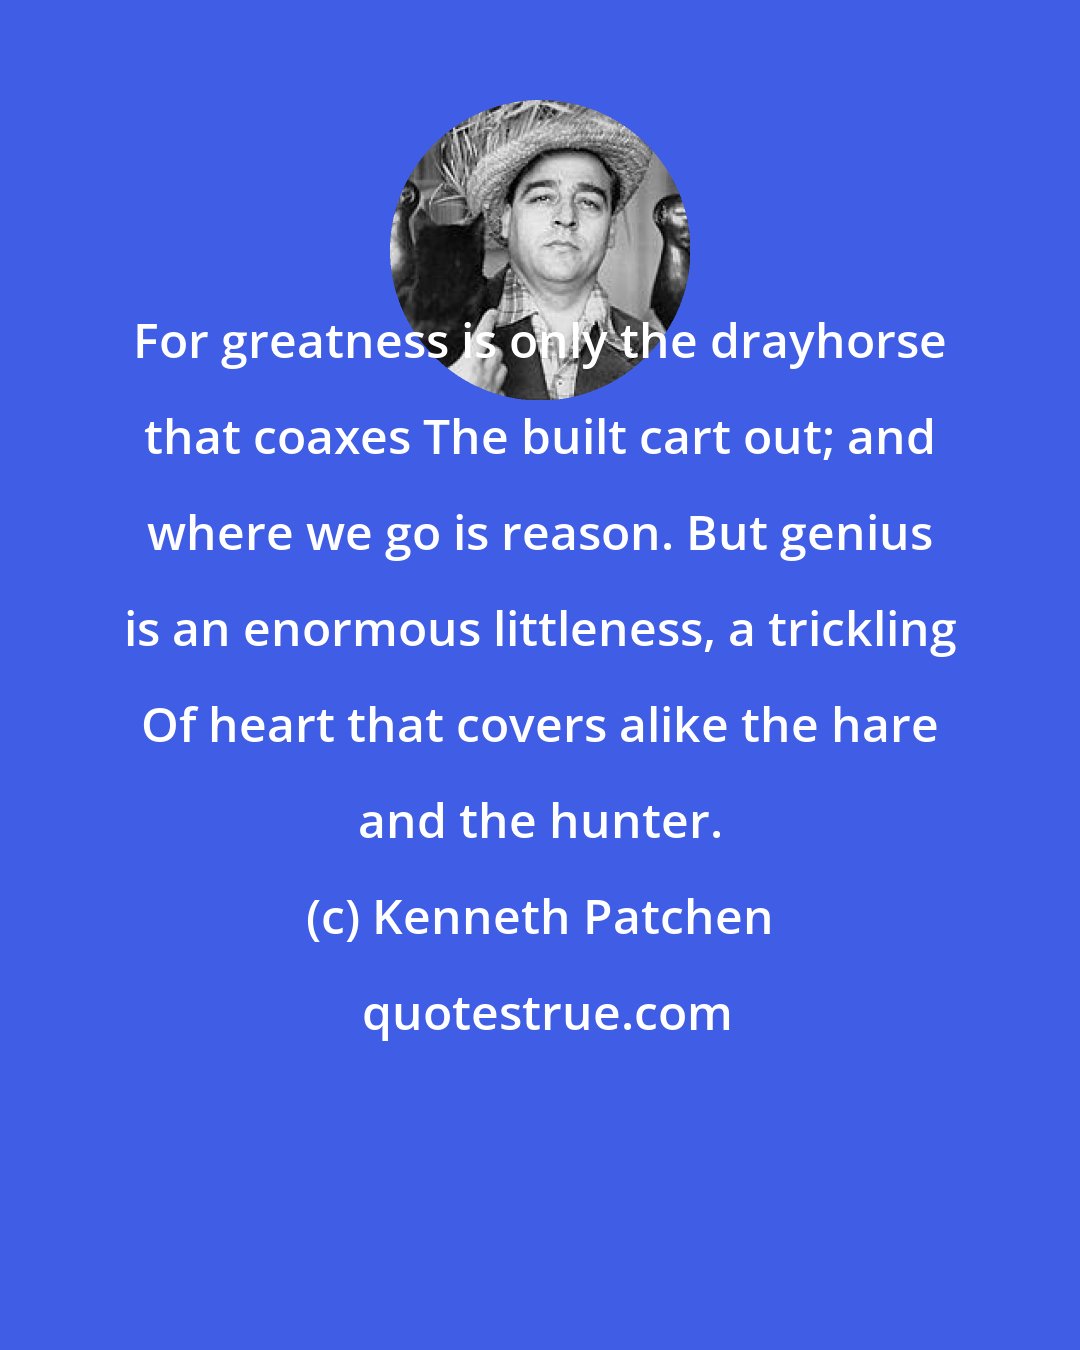 Kenneth Patchen: For greatness is only the drayhorse that coaxes The built cart out; and where we go is reason. But genius is an enormous littleness, a trickling Of heart that covers alike the hare and the hunter.